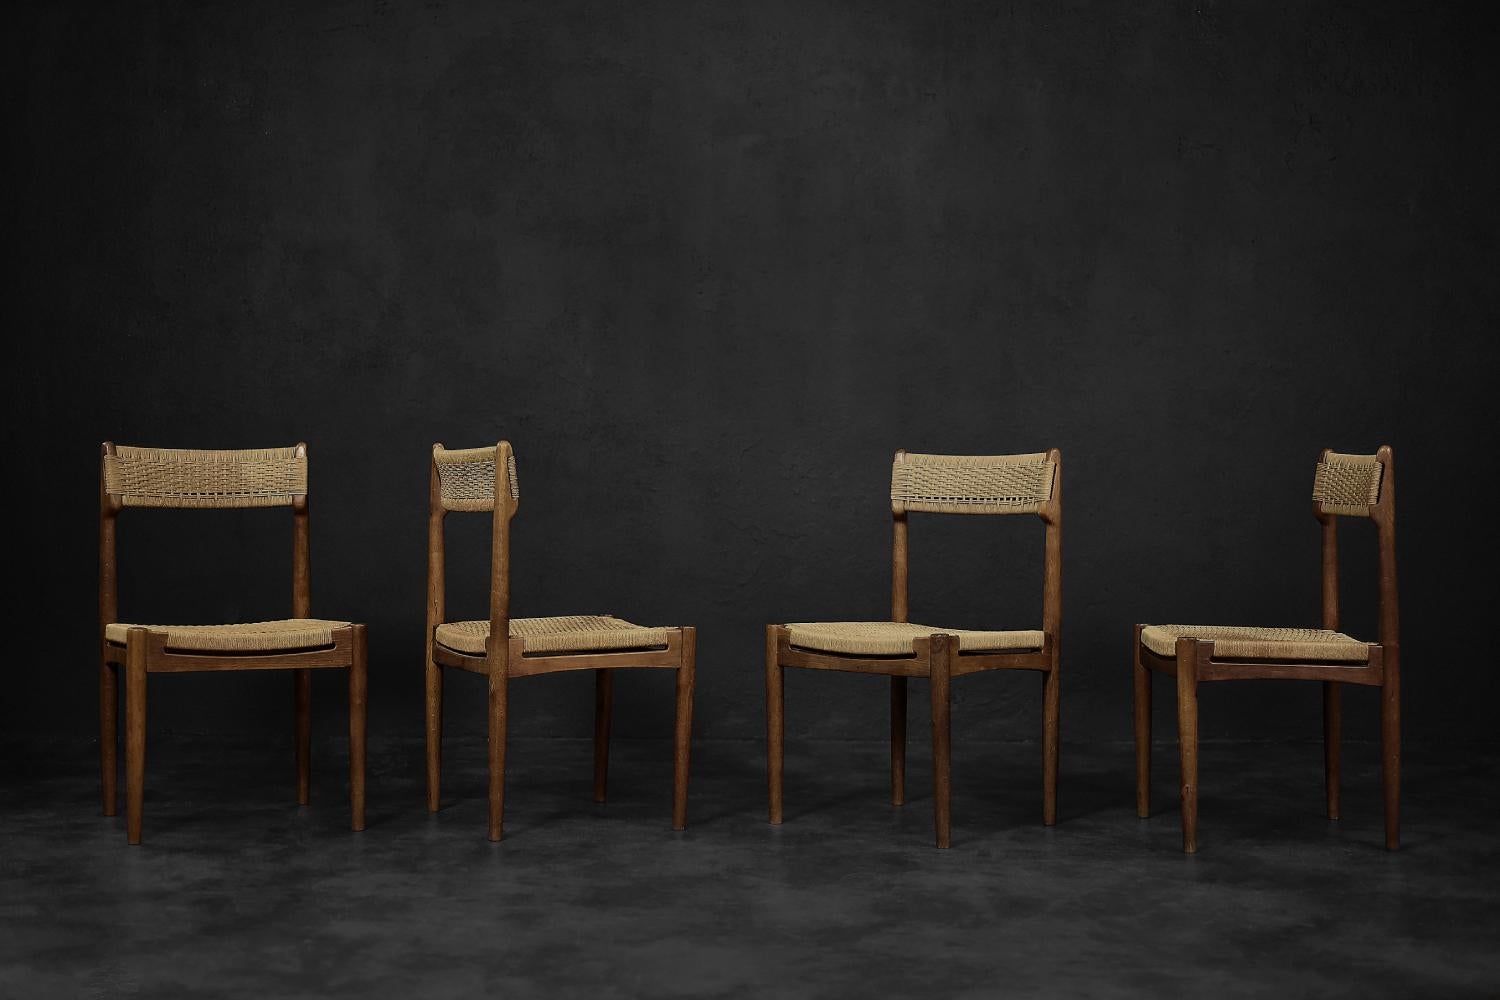 This set of four modernist chairs was designed by E. Knudsen and made by the Danish furniture manufacturer K. Knudsen & Søn in 1952. This model was exhibited for the first time at the congress in Federica, where it was designed. The frame is made of